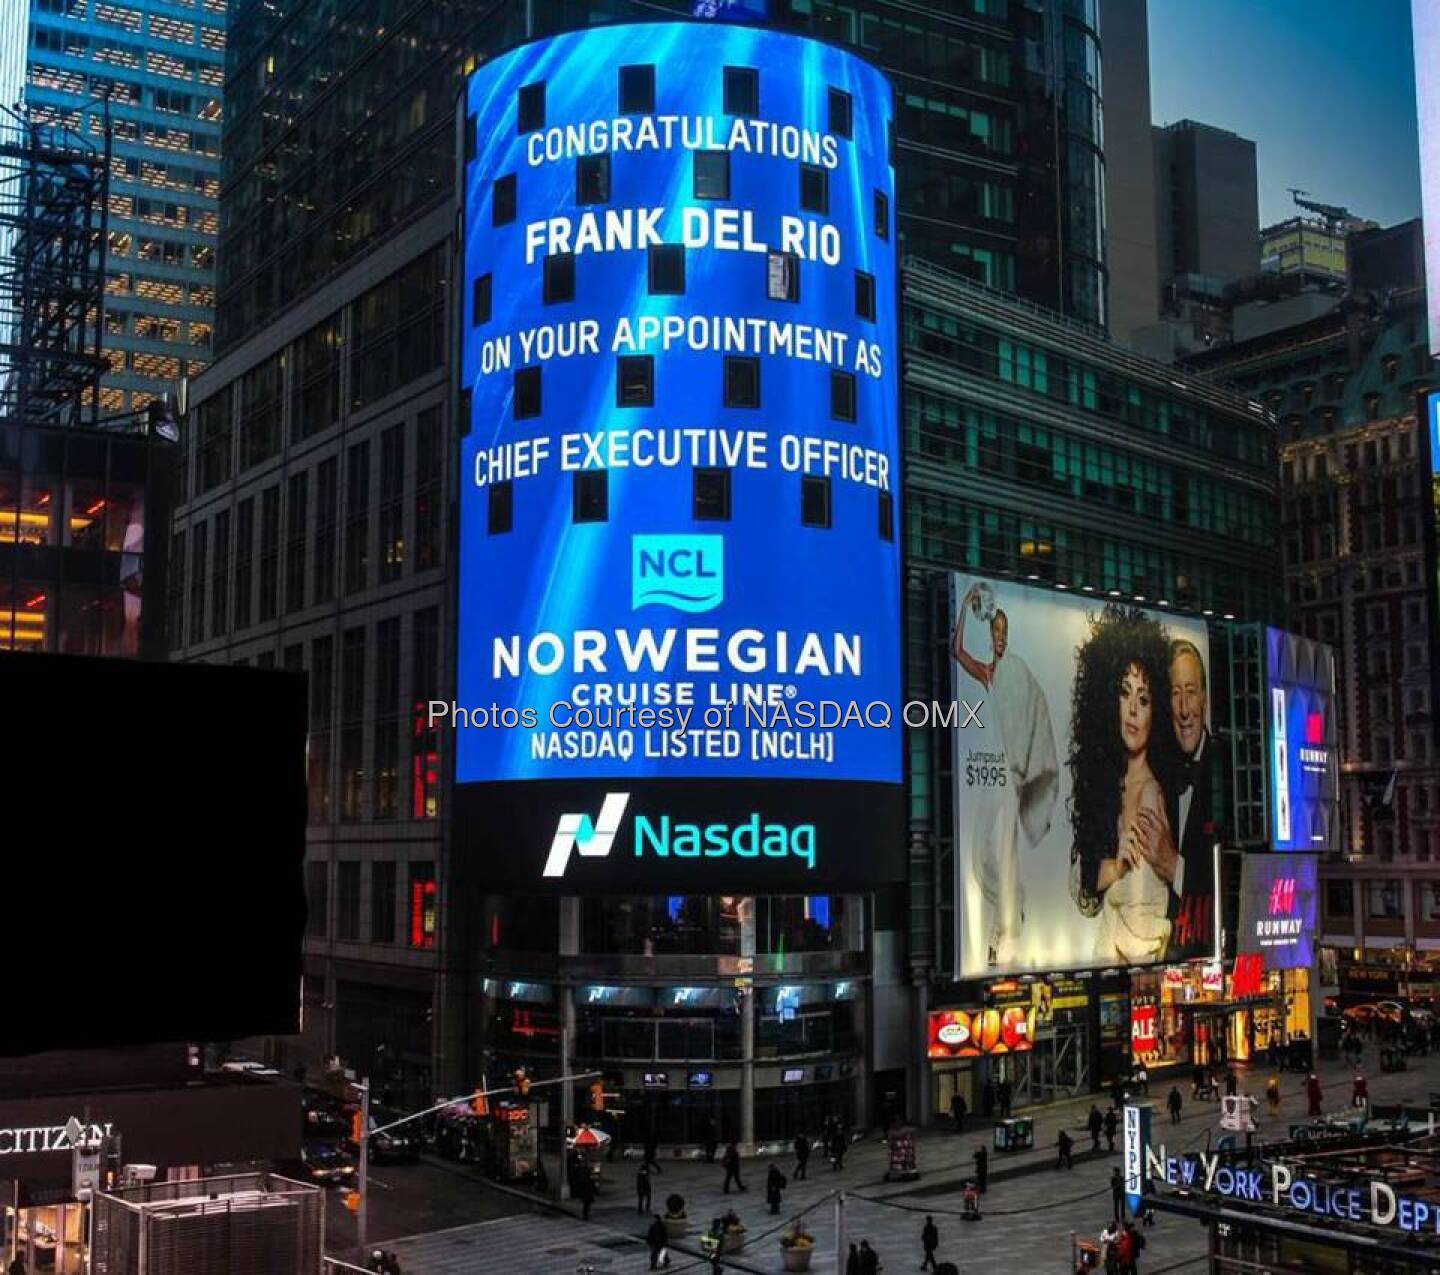 Congratulations Frank Del Rio on your appointment as CEO of Norwegian Cruise Line$NCLH  Source: http://facebook.com/NASDAQ